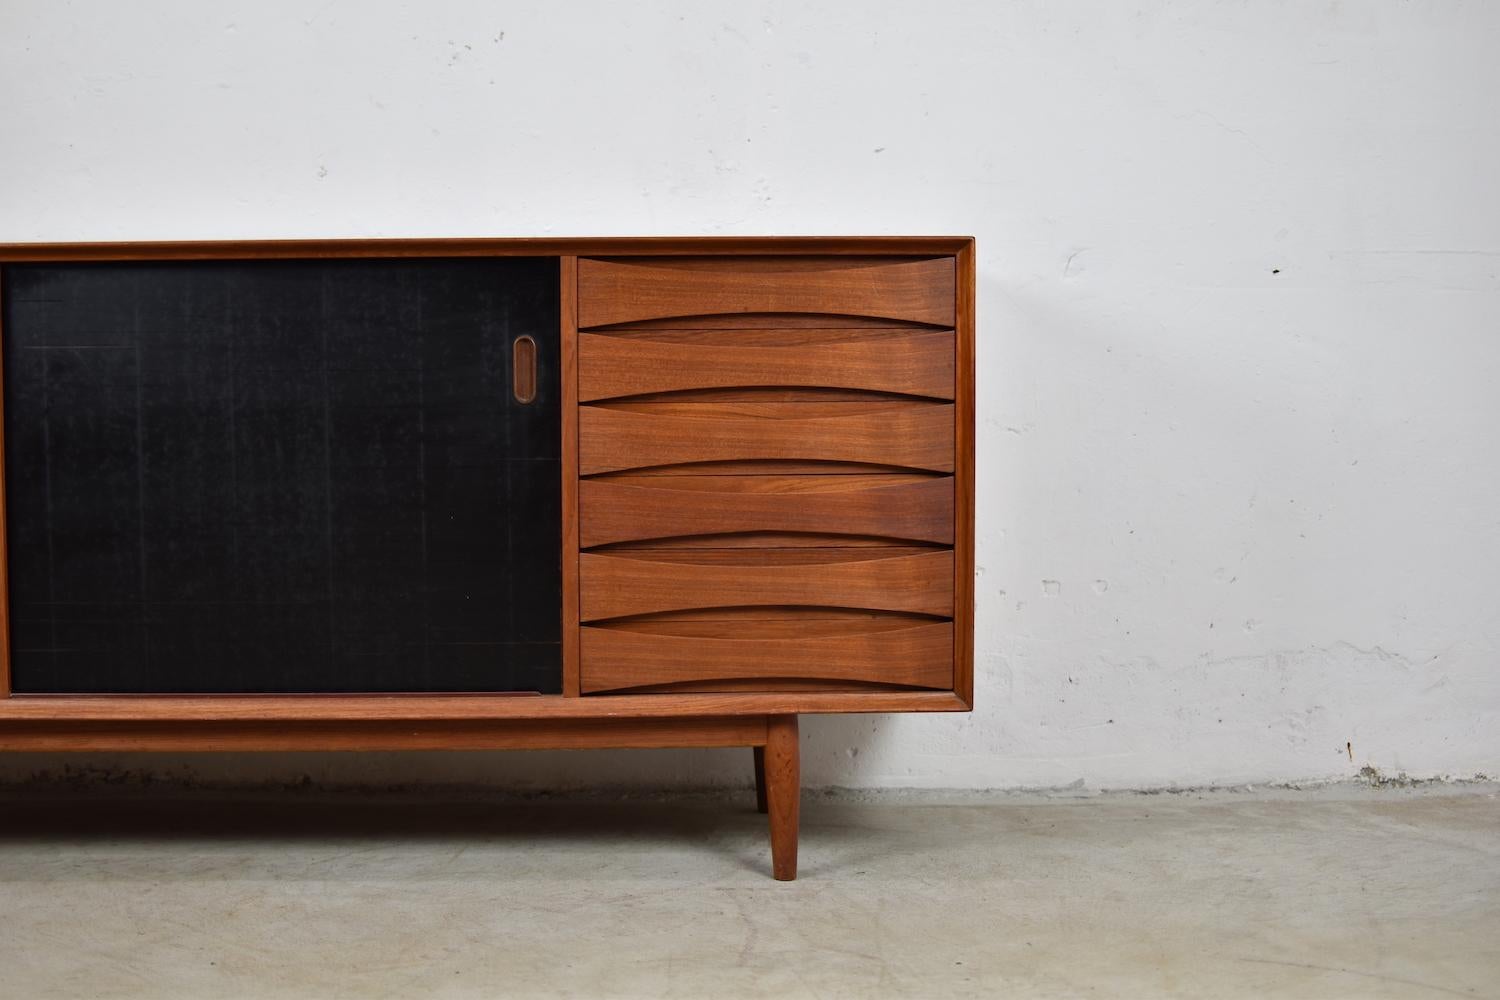 Lovely OS29 sideboard by Arne Vodder for Sibast Mobler, Denmark, 1958. This rare cabinet is made out of teak and has two sliding doors that are reversible to teak and black lacquer. On the right a series of marvelous curved drawers. Typical raised